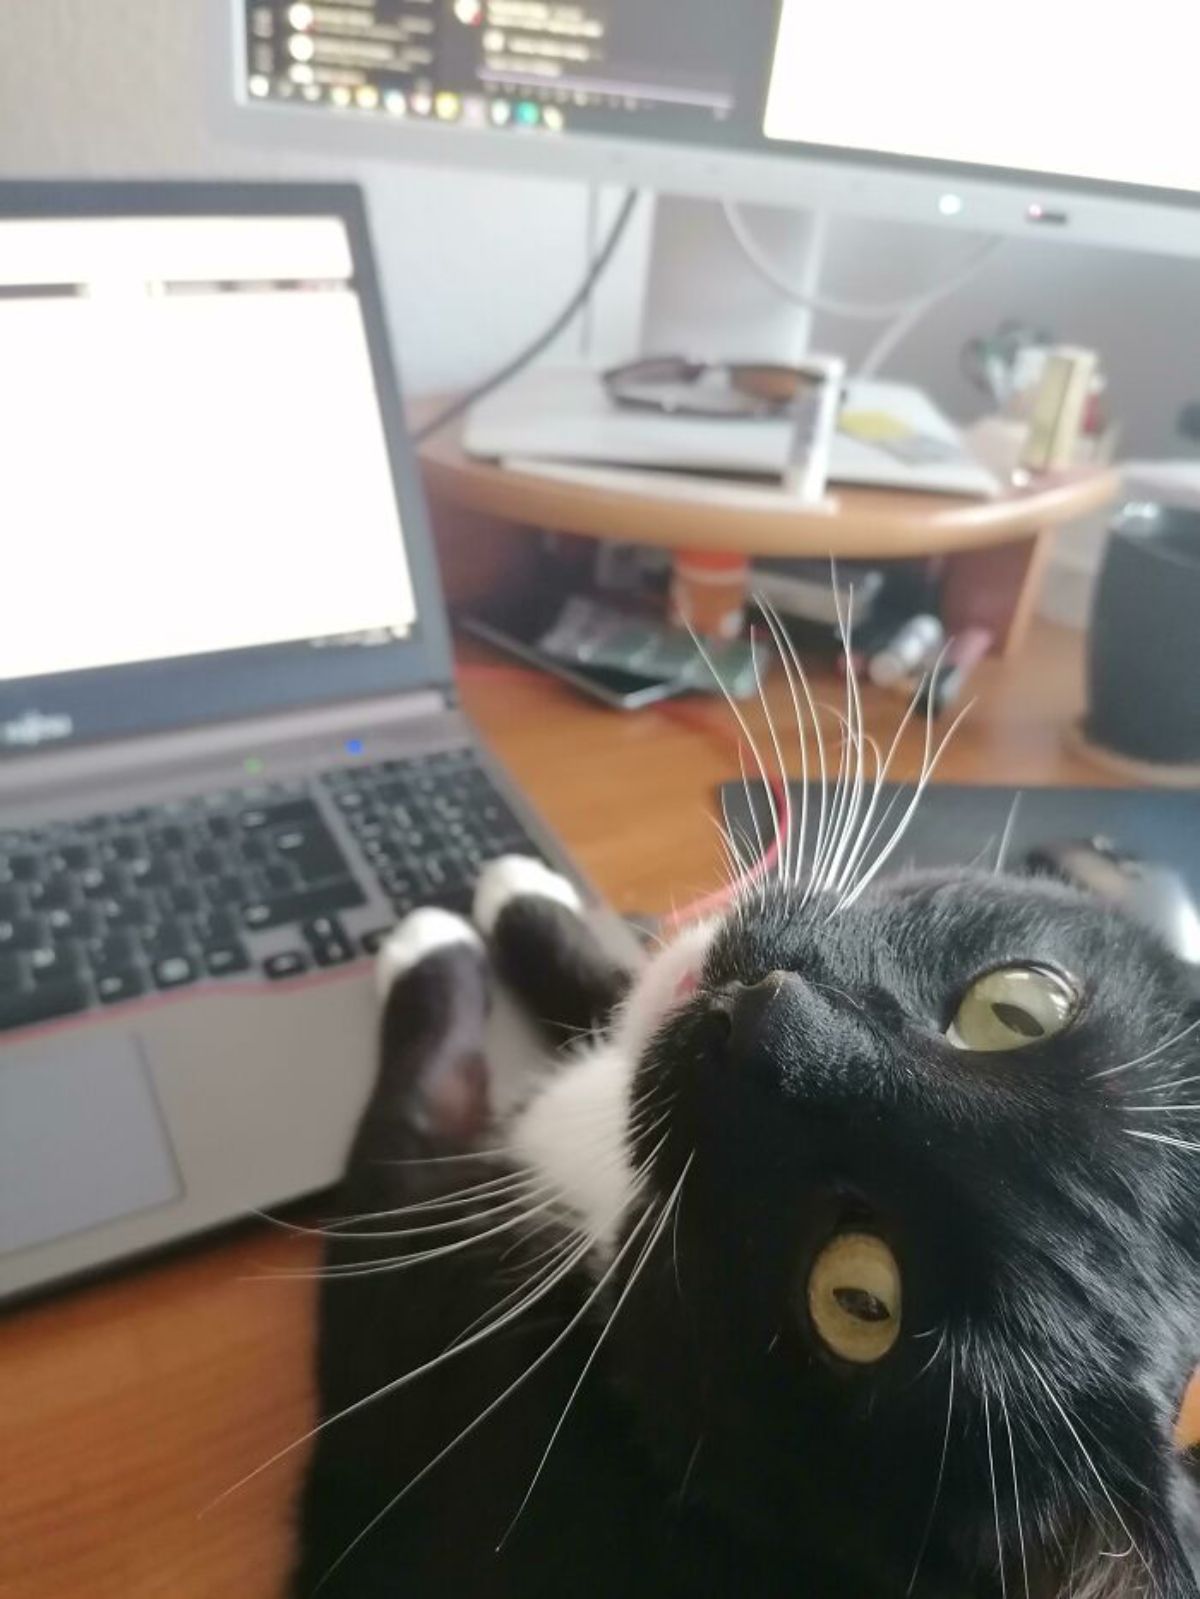 black and white cat with front paws on a laptop looking back and up lovingly at someone